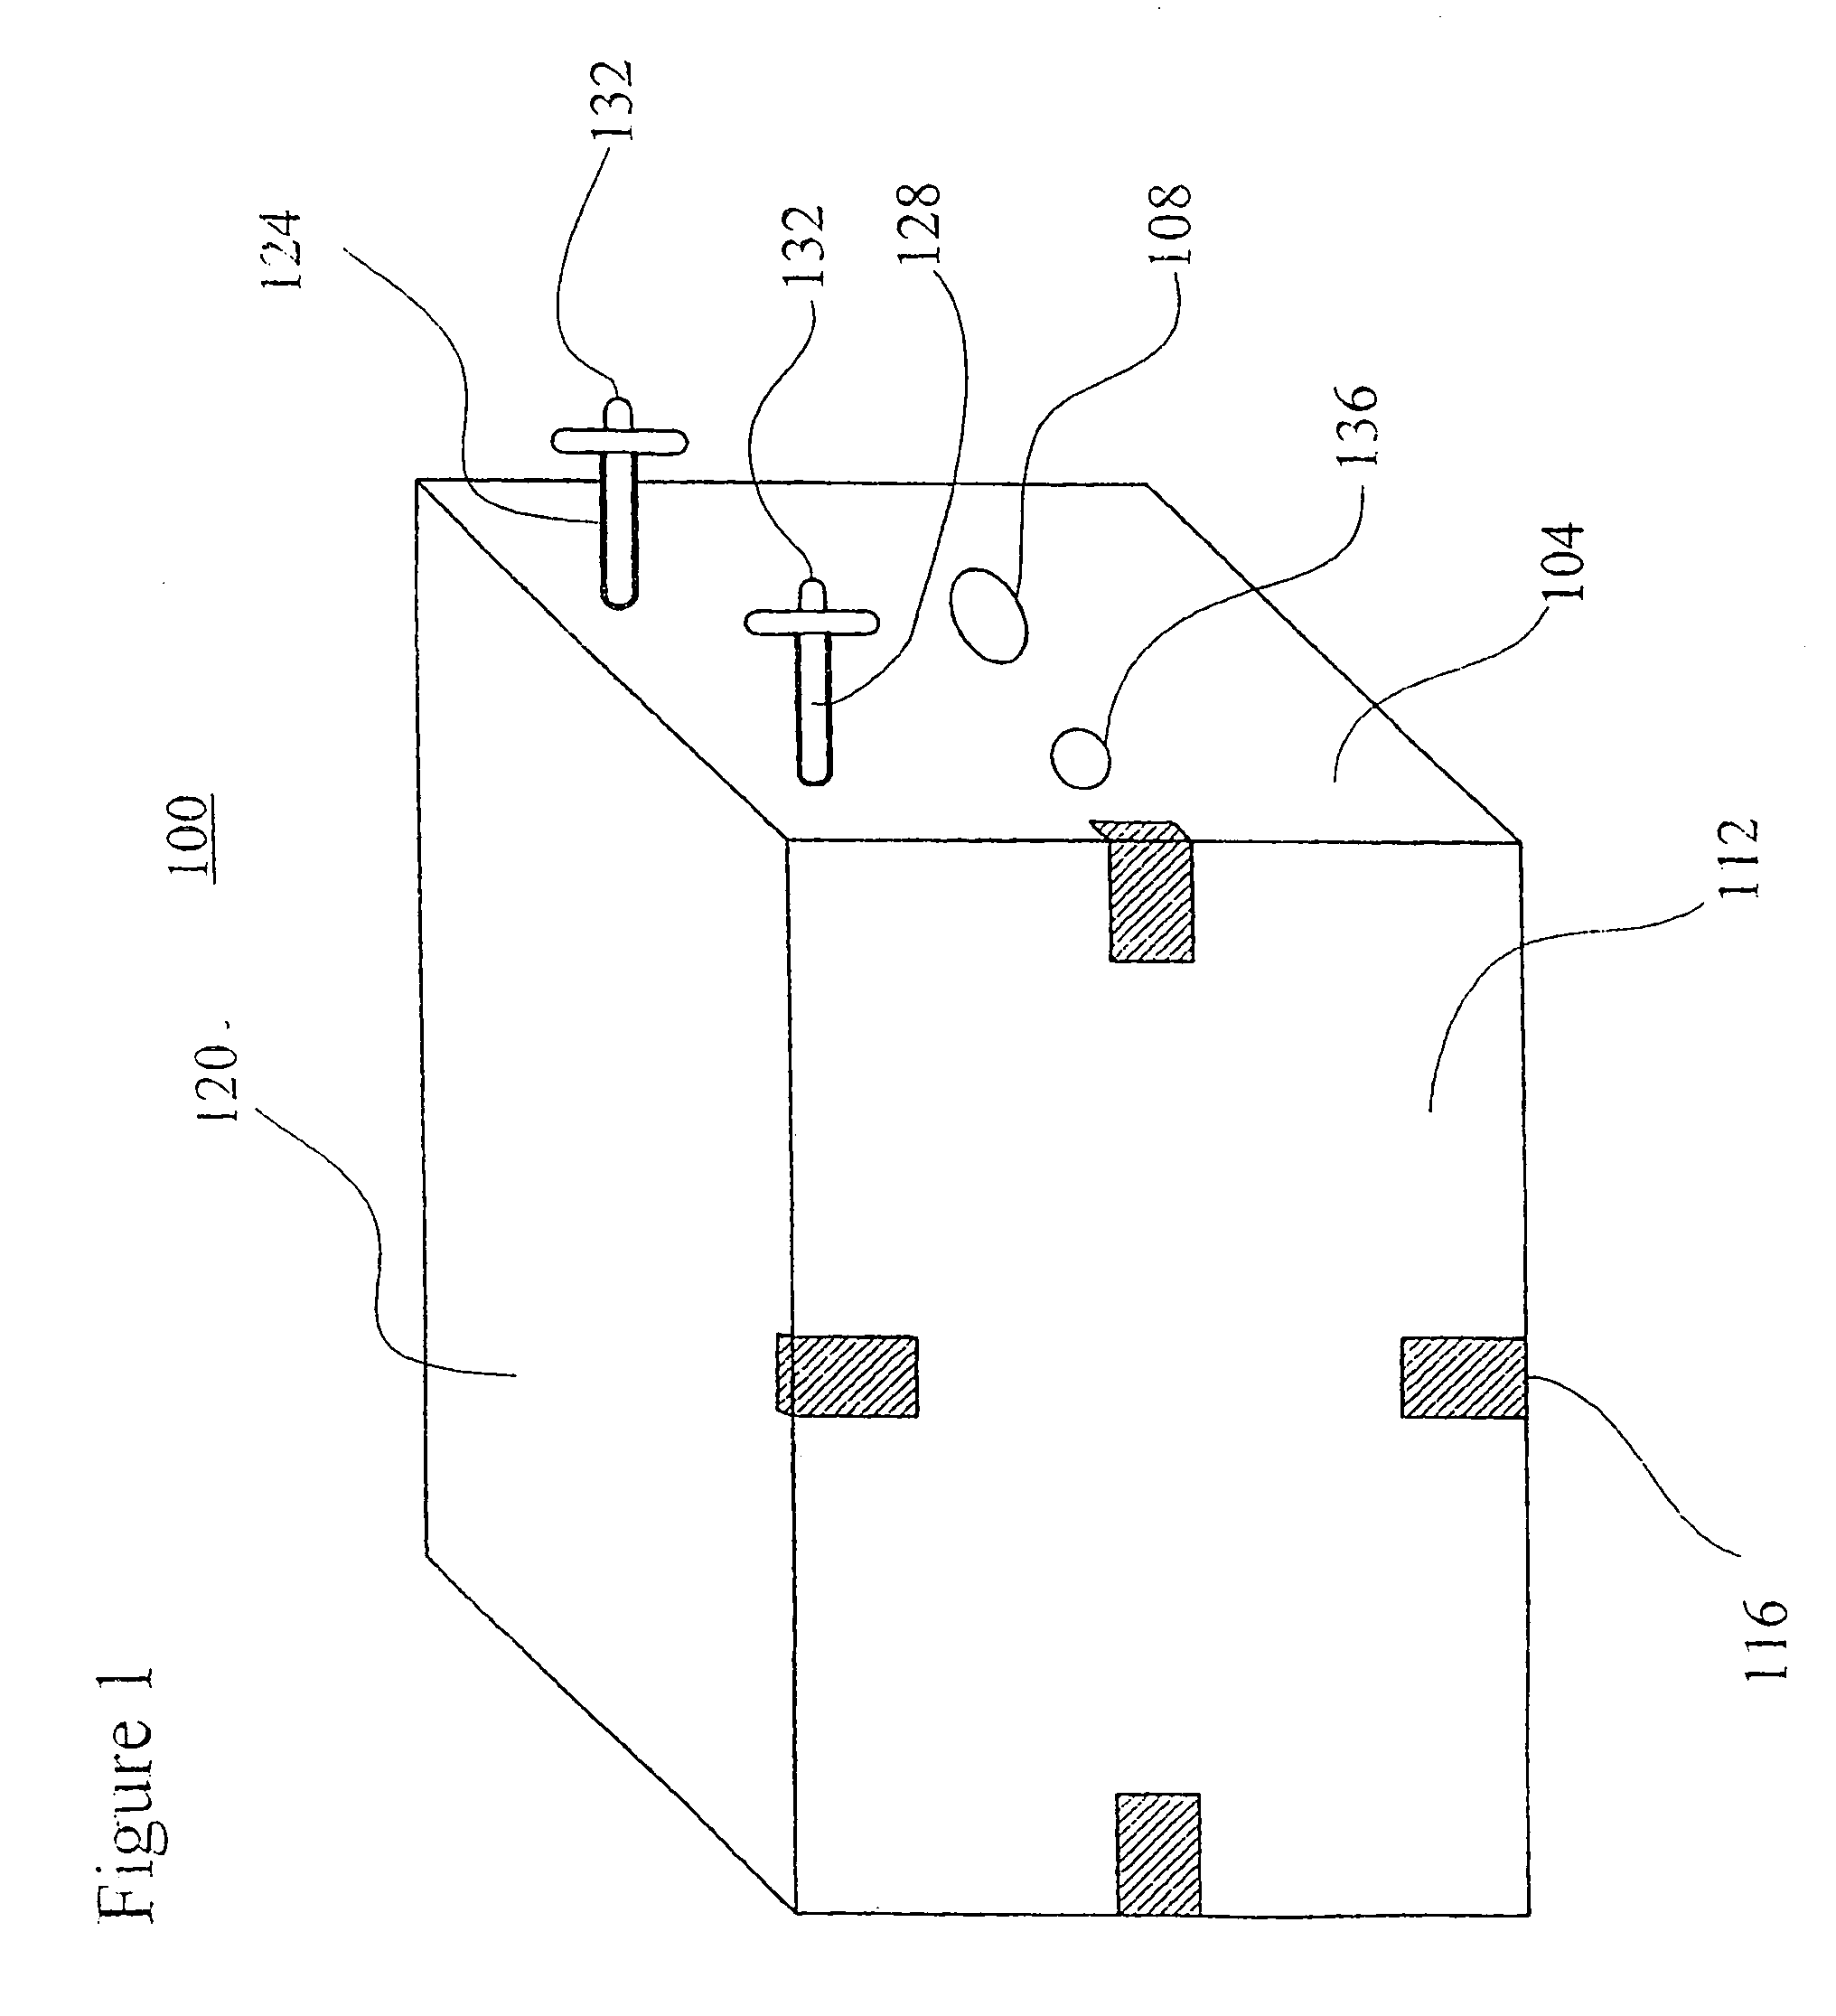 Apparatuses and methods for the production of haematophagous organisms and parasites suitable for vaccine production